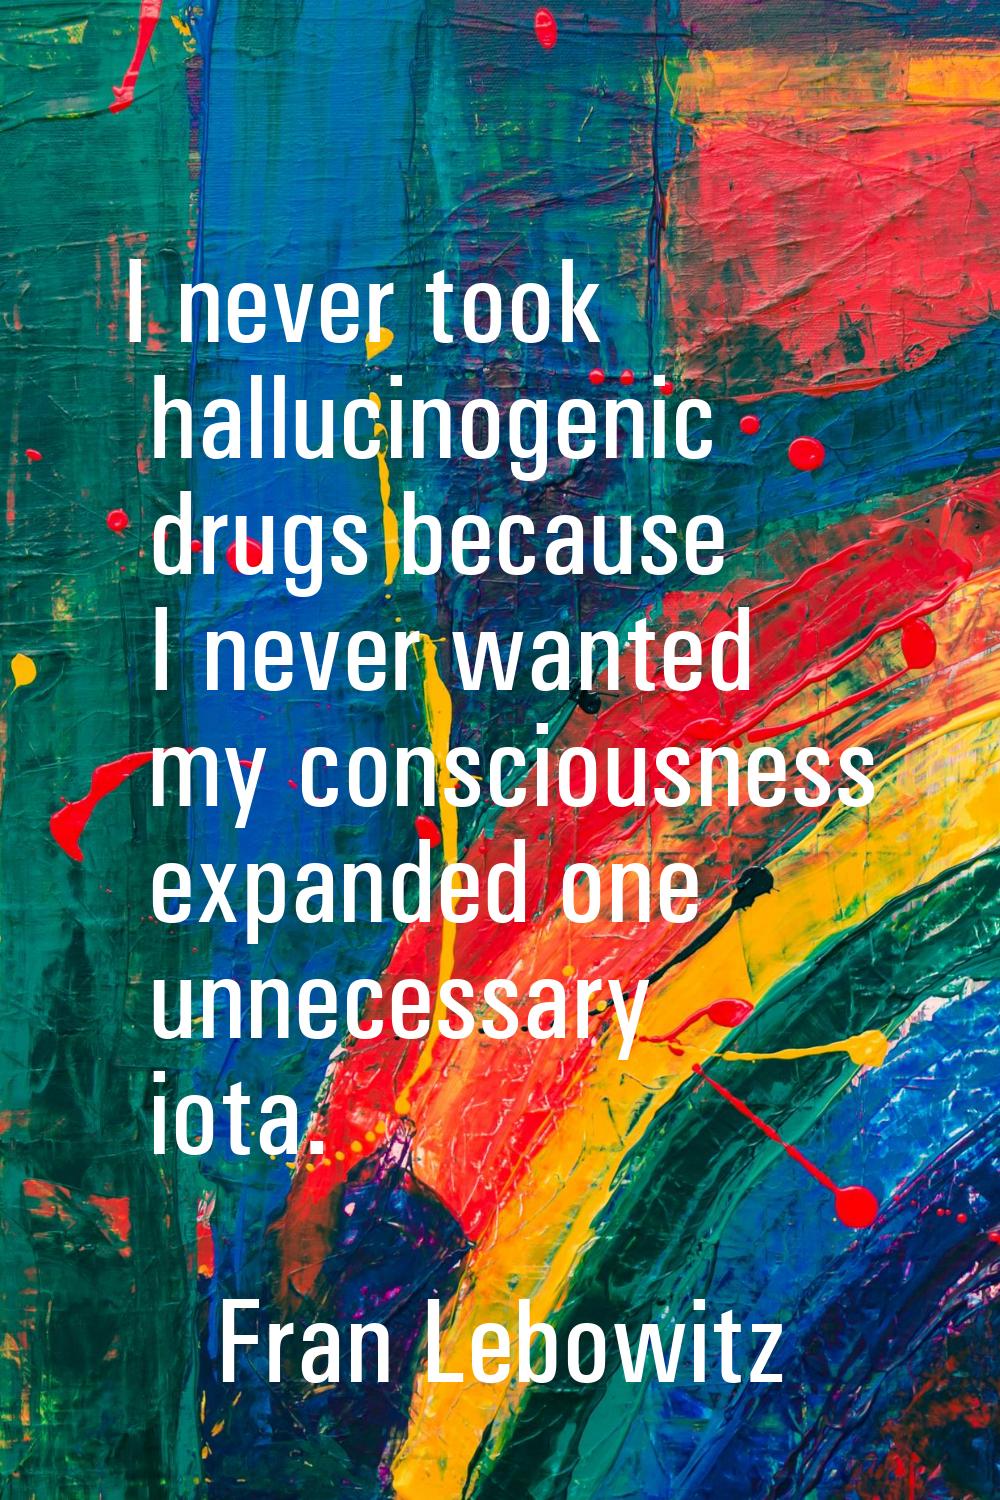 I never took hallucinogenic drugs because I never wanted my consciousness expanded one unnecessary 